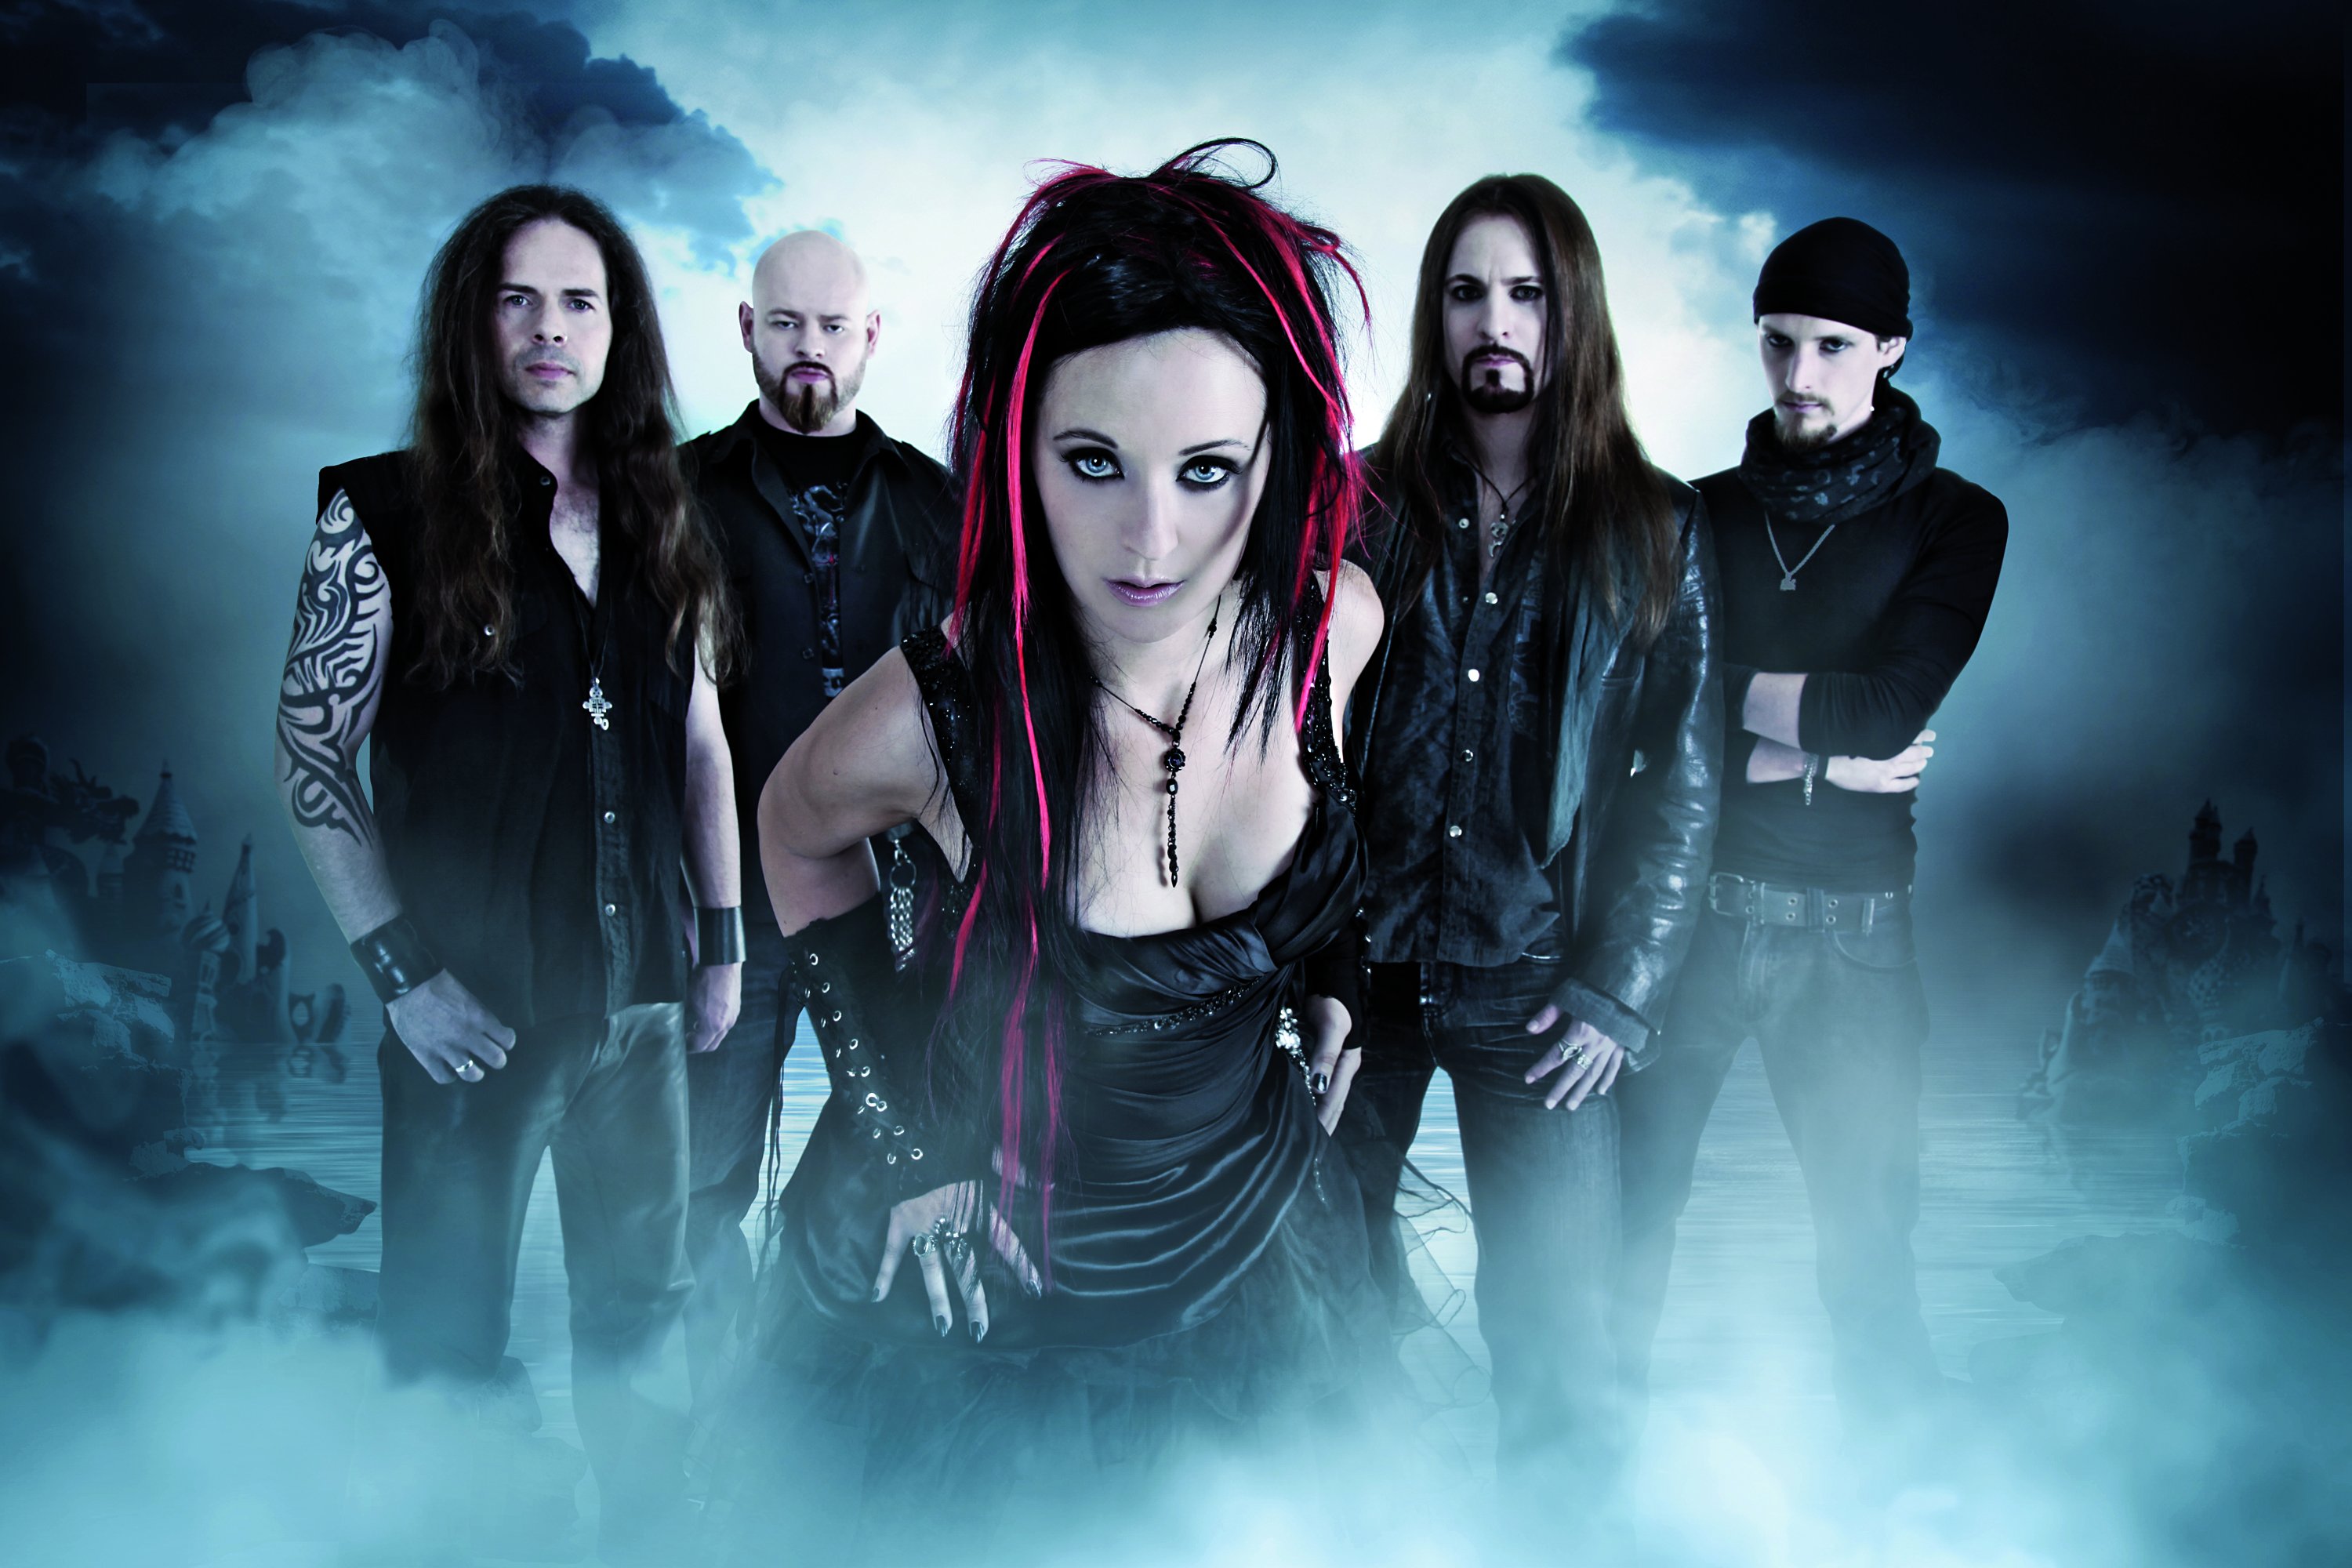 Free download XANDRIA symphonic metal heavy gothic rock 19 wallpaper background [3000x2000] for your Desktop, Mobile & Tablet. Explore Symphonic Metal Wallpaper. Nightwish Wallpaper